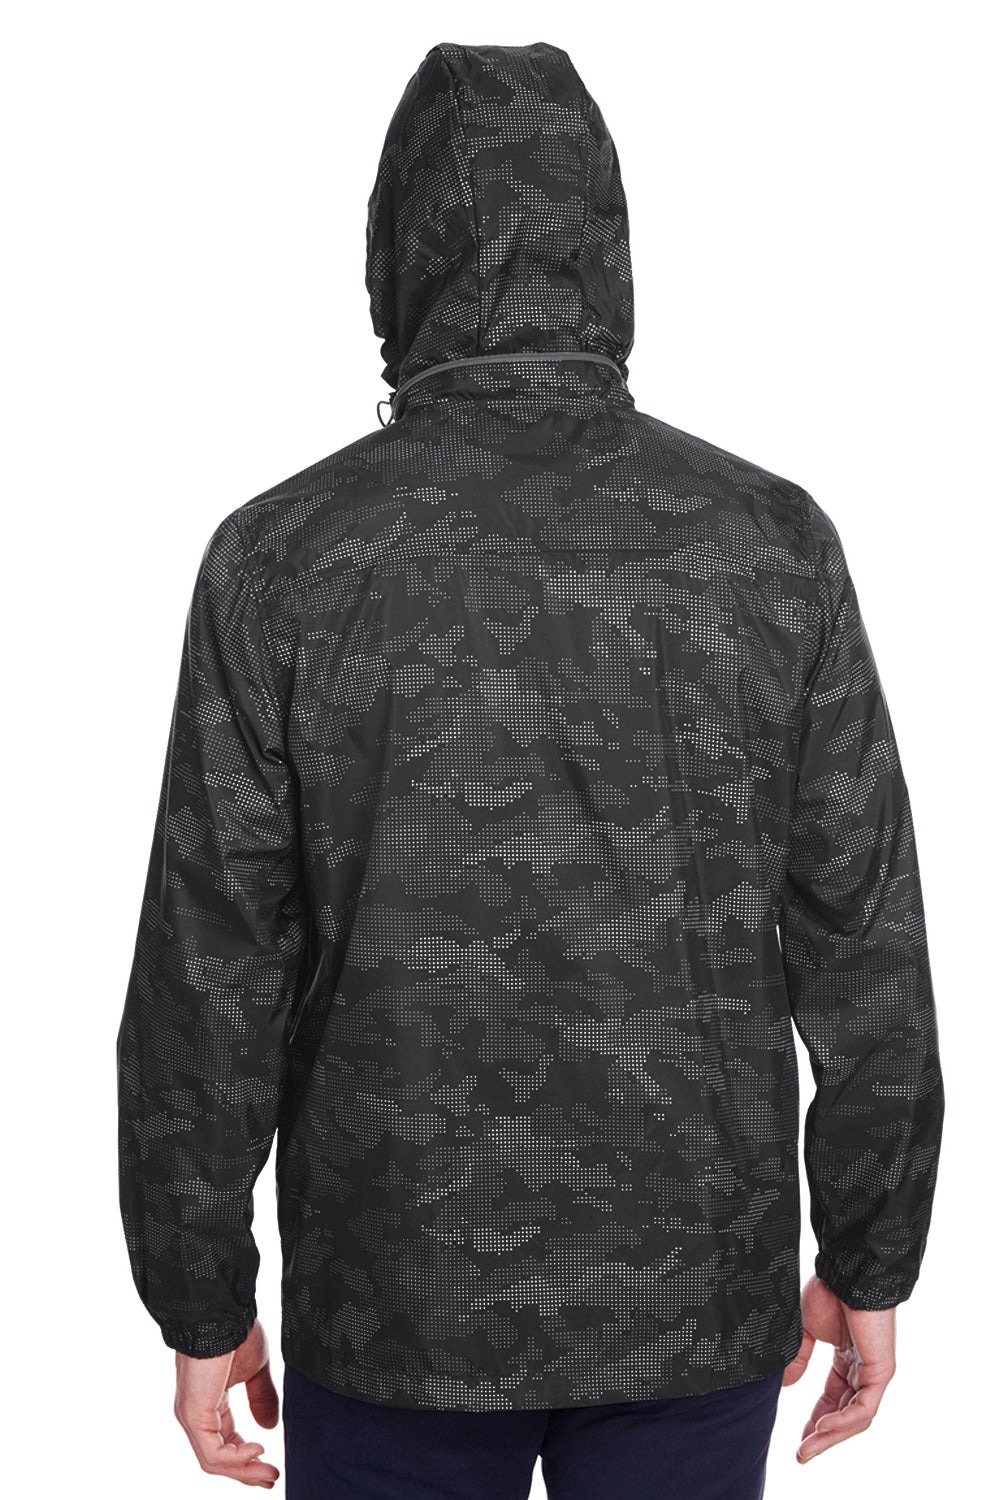 North End NE711 Mens Rotate Reflective Water Resistant Full Zip Hooded Jacket Black/Carbon Grey Back